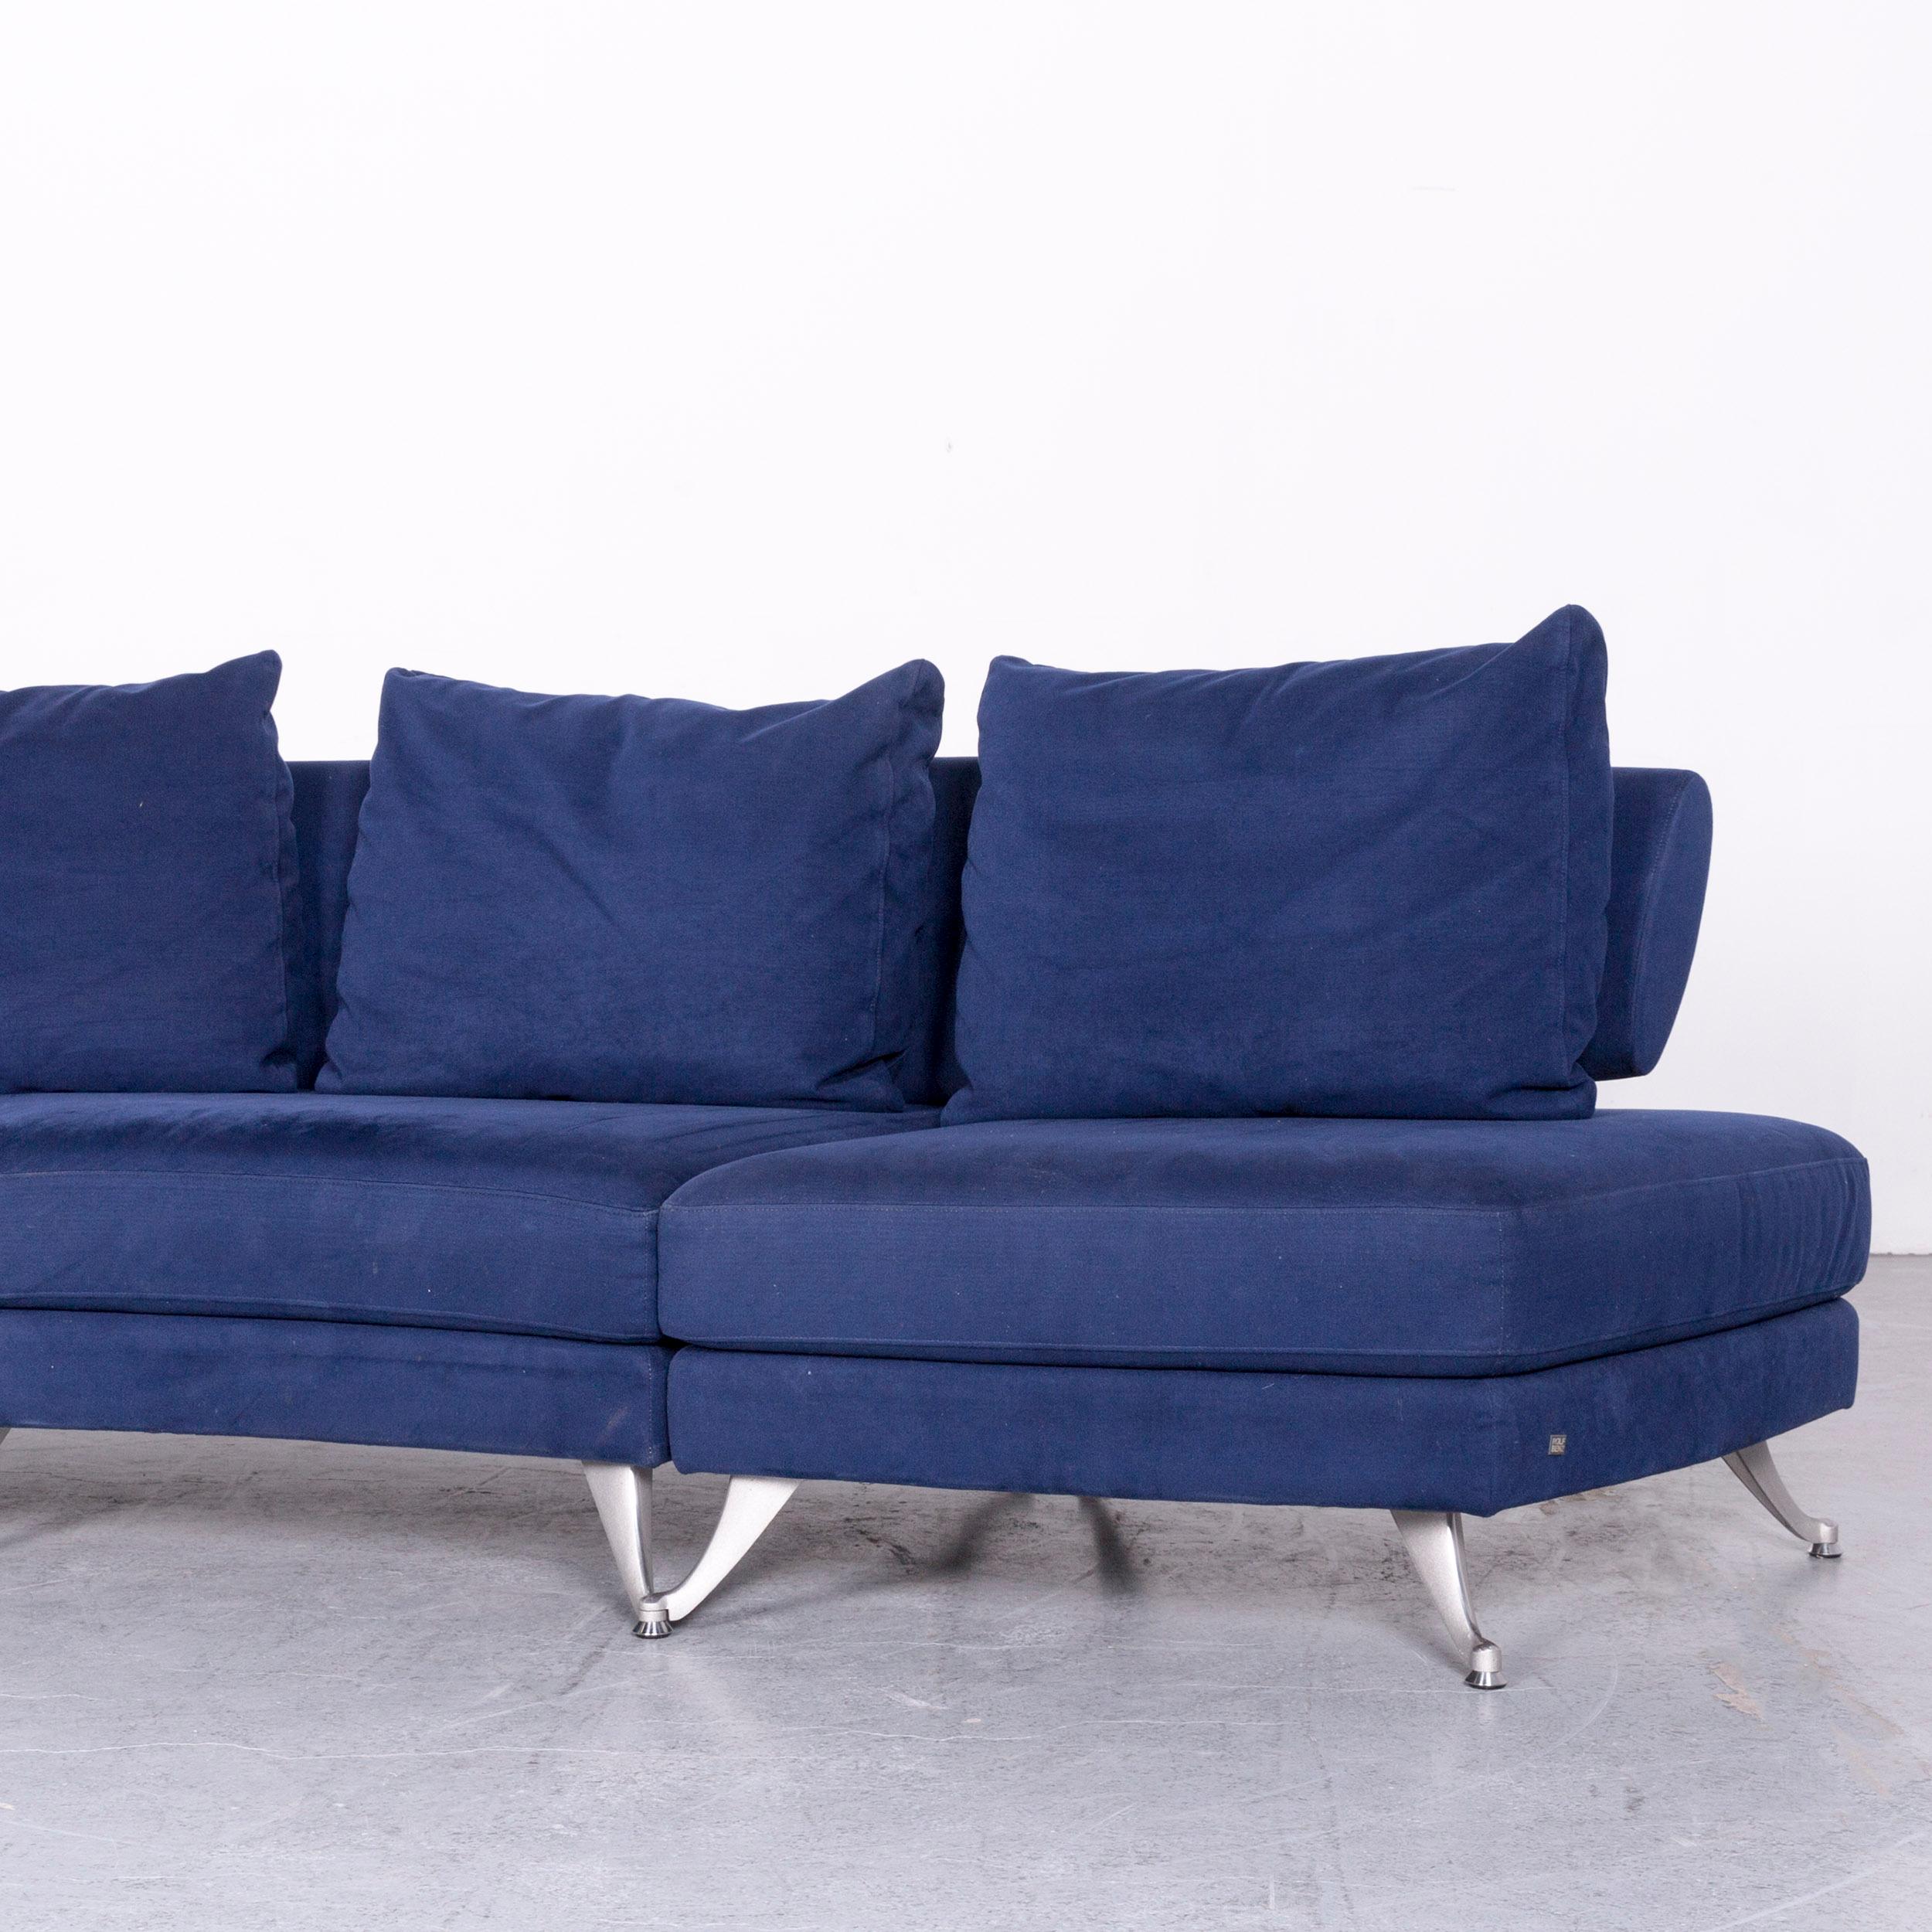 Rolf Benz 222 Designer Sofa Blue Fabric Three-Seat Corner Couch In Excellent Condition For Sale In Cologne, DE